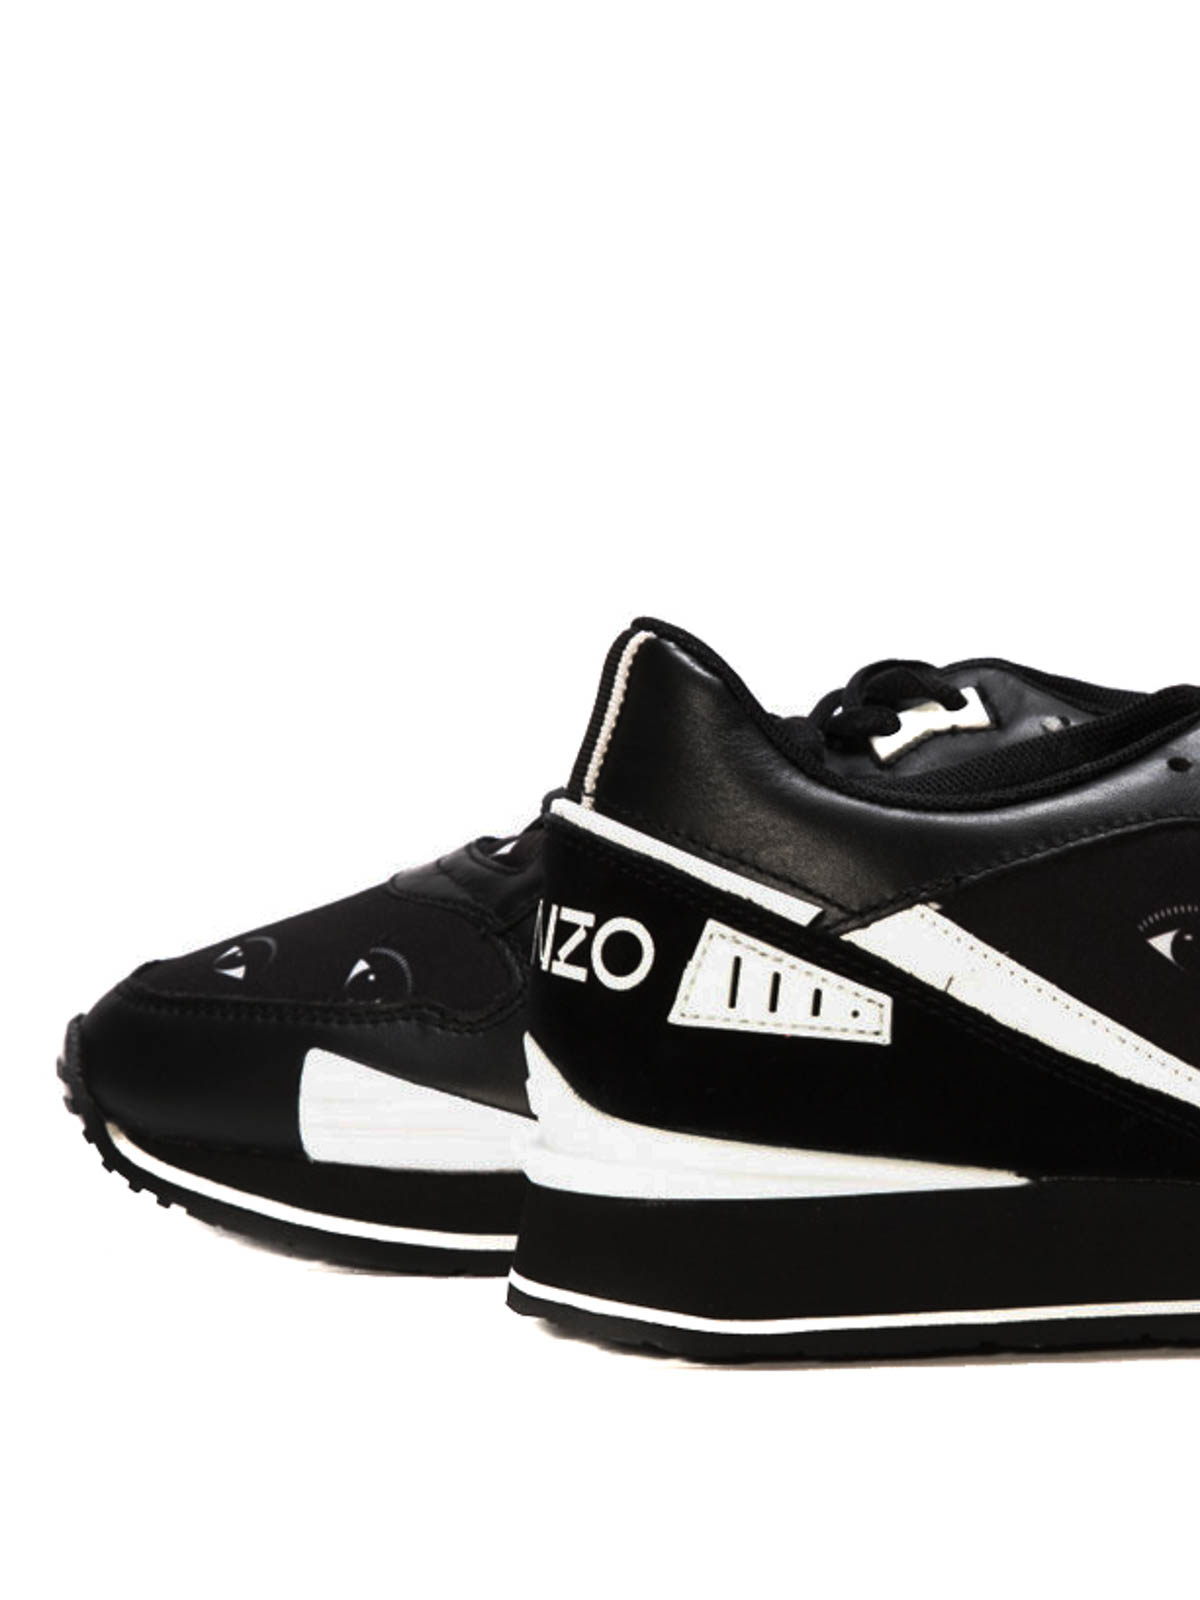 Trainers Kenzo - Eyes sneakers - L56SHM424C6199 | Shop online at iKRIX